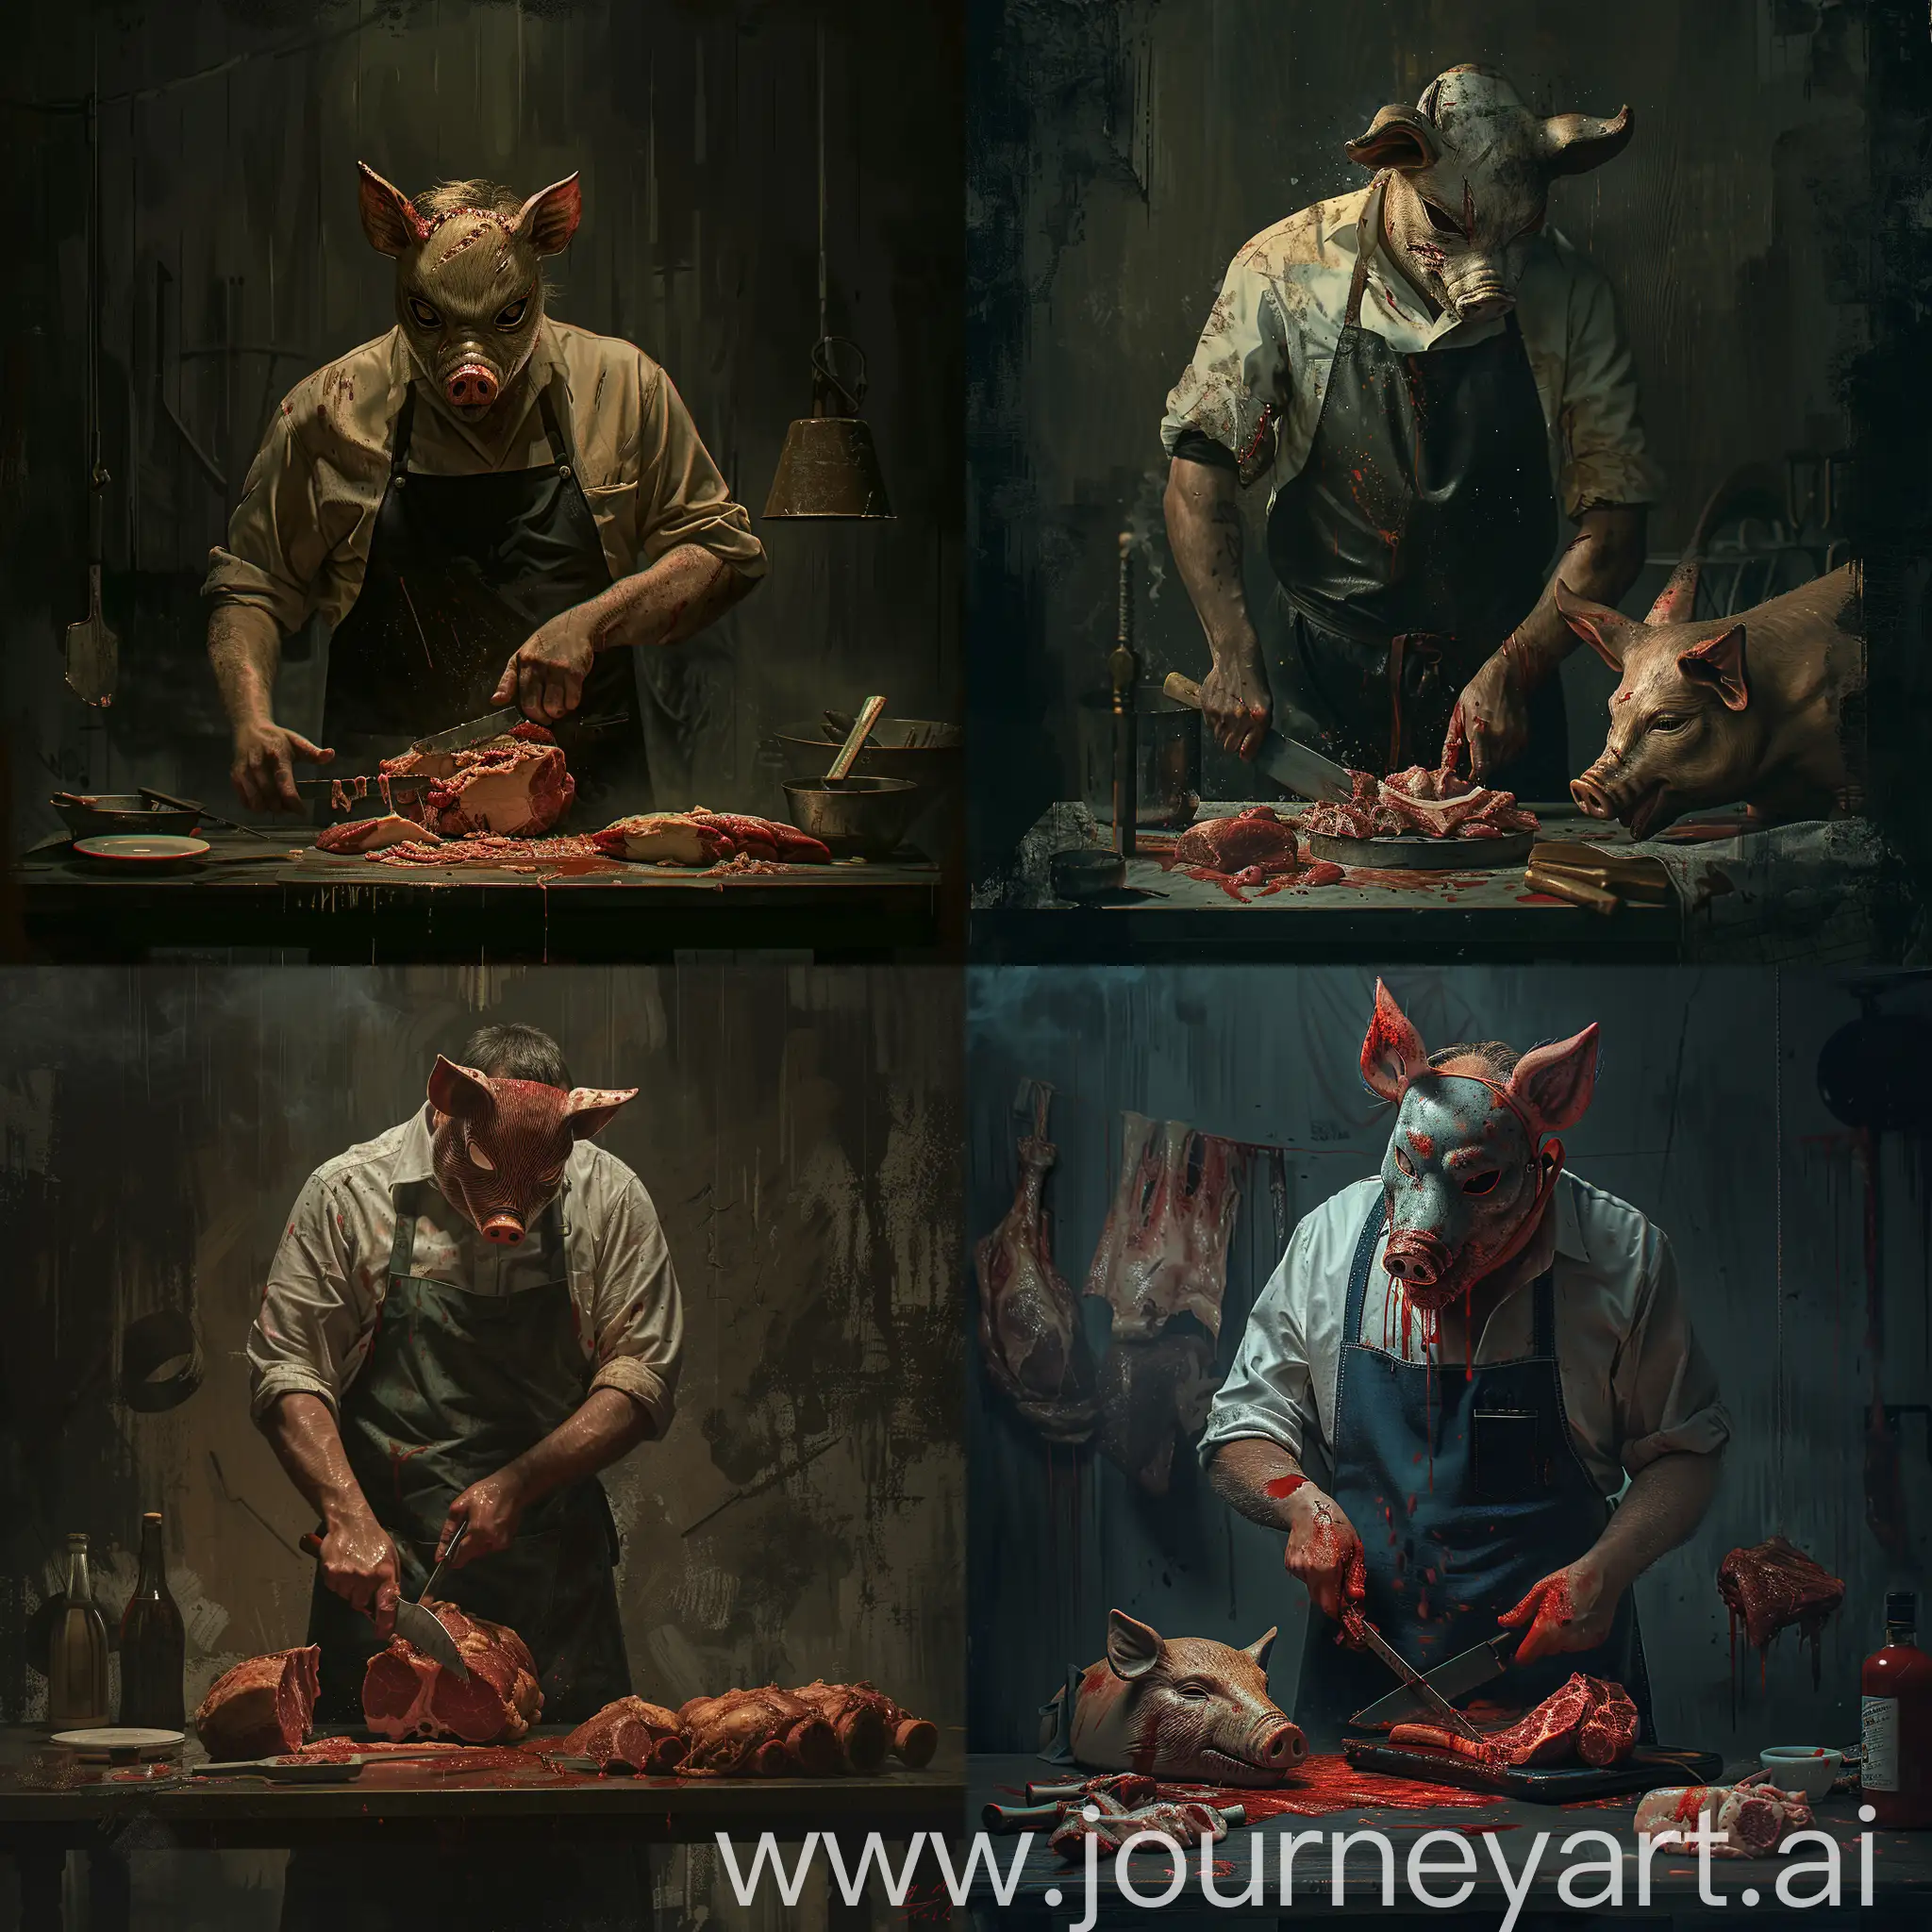 A man with butcher apron and a pig mask slicing meat on the table. dark creepy environment. digital art. guillerme del toro style dark image.